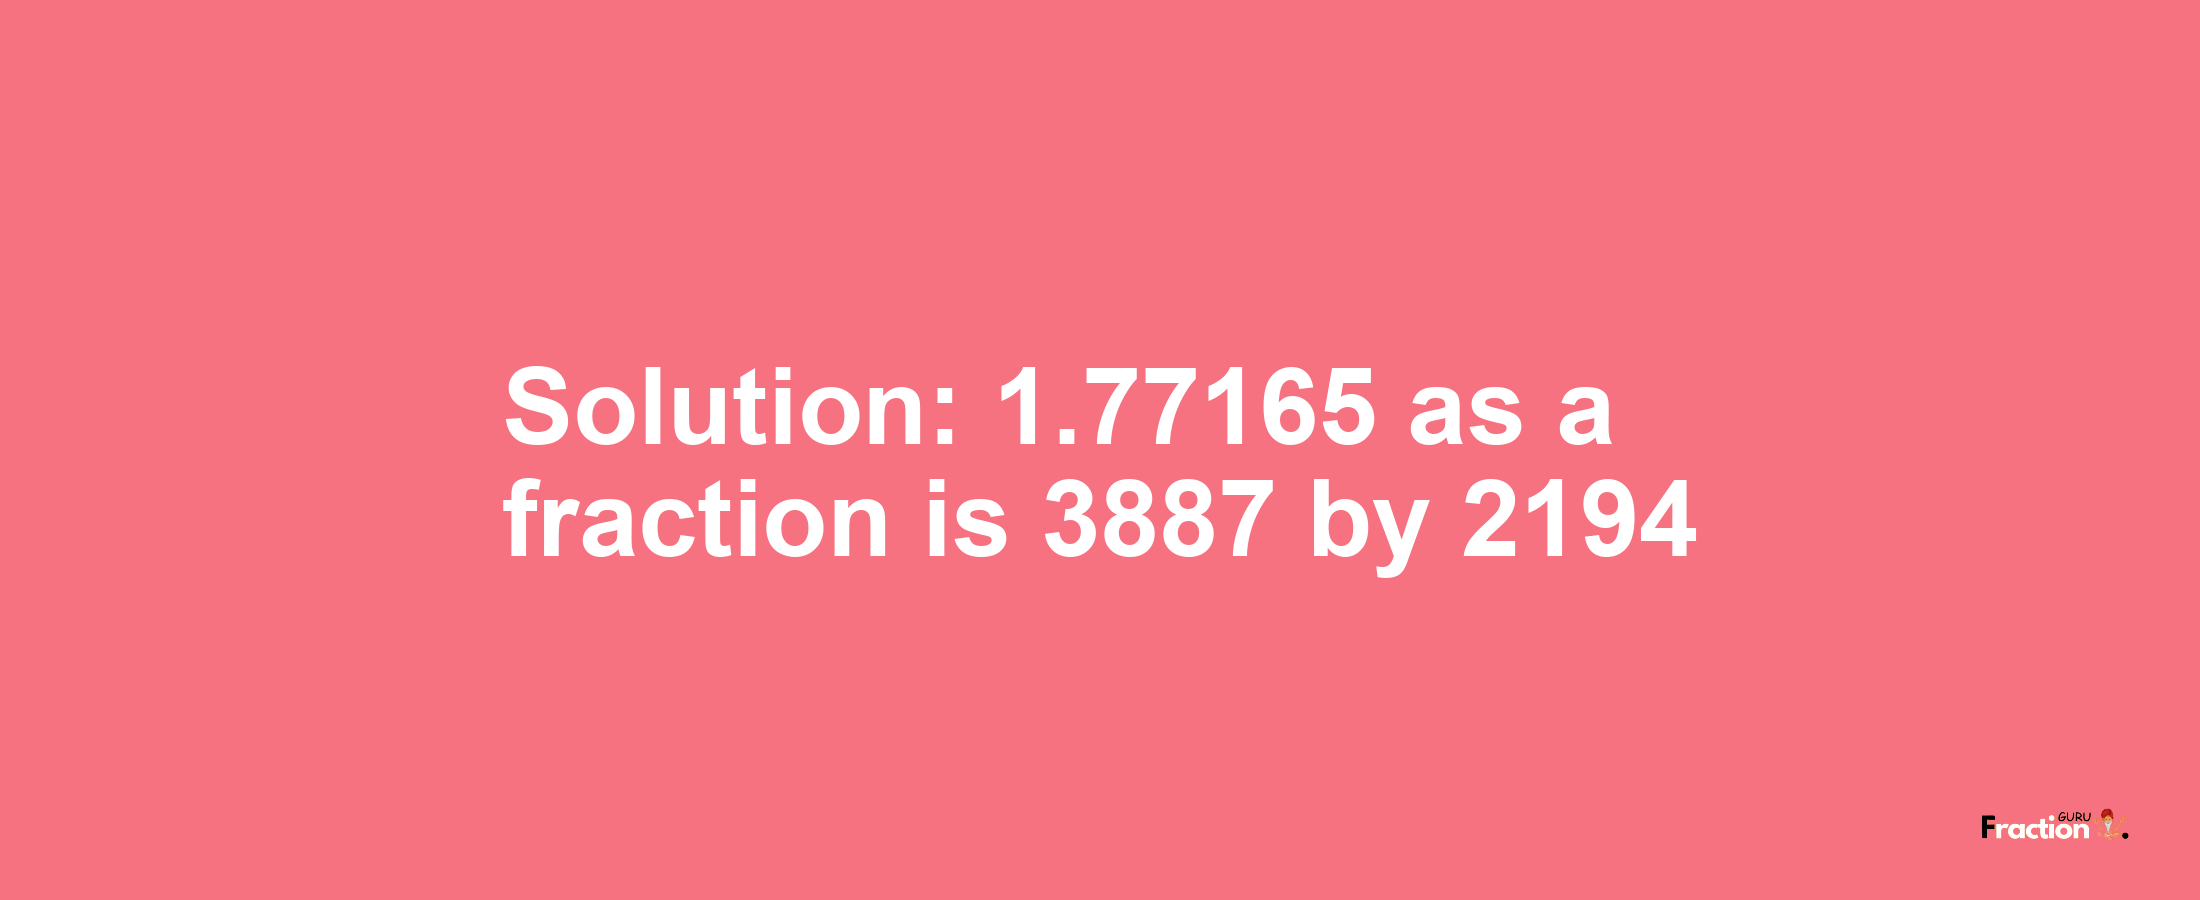 Solution:1.77165 as a fraction is 3887/2194